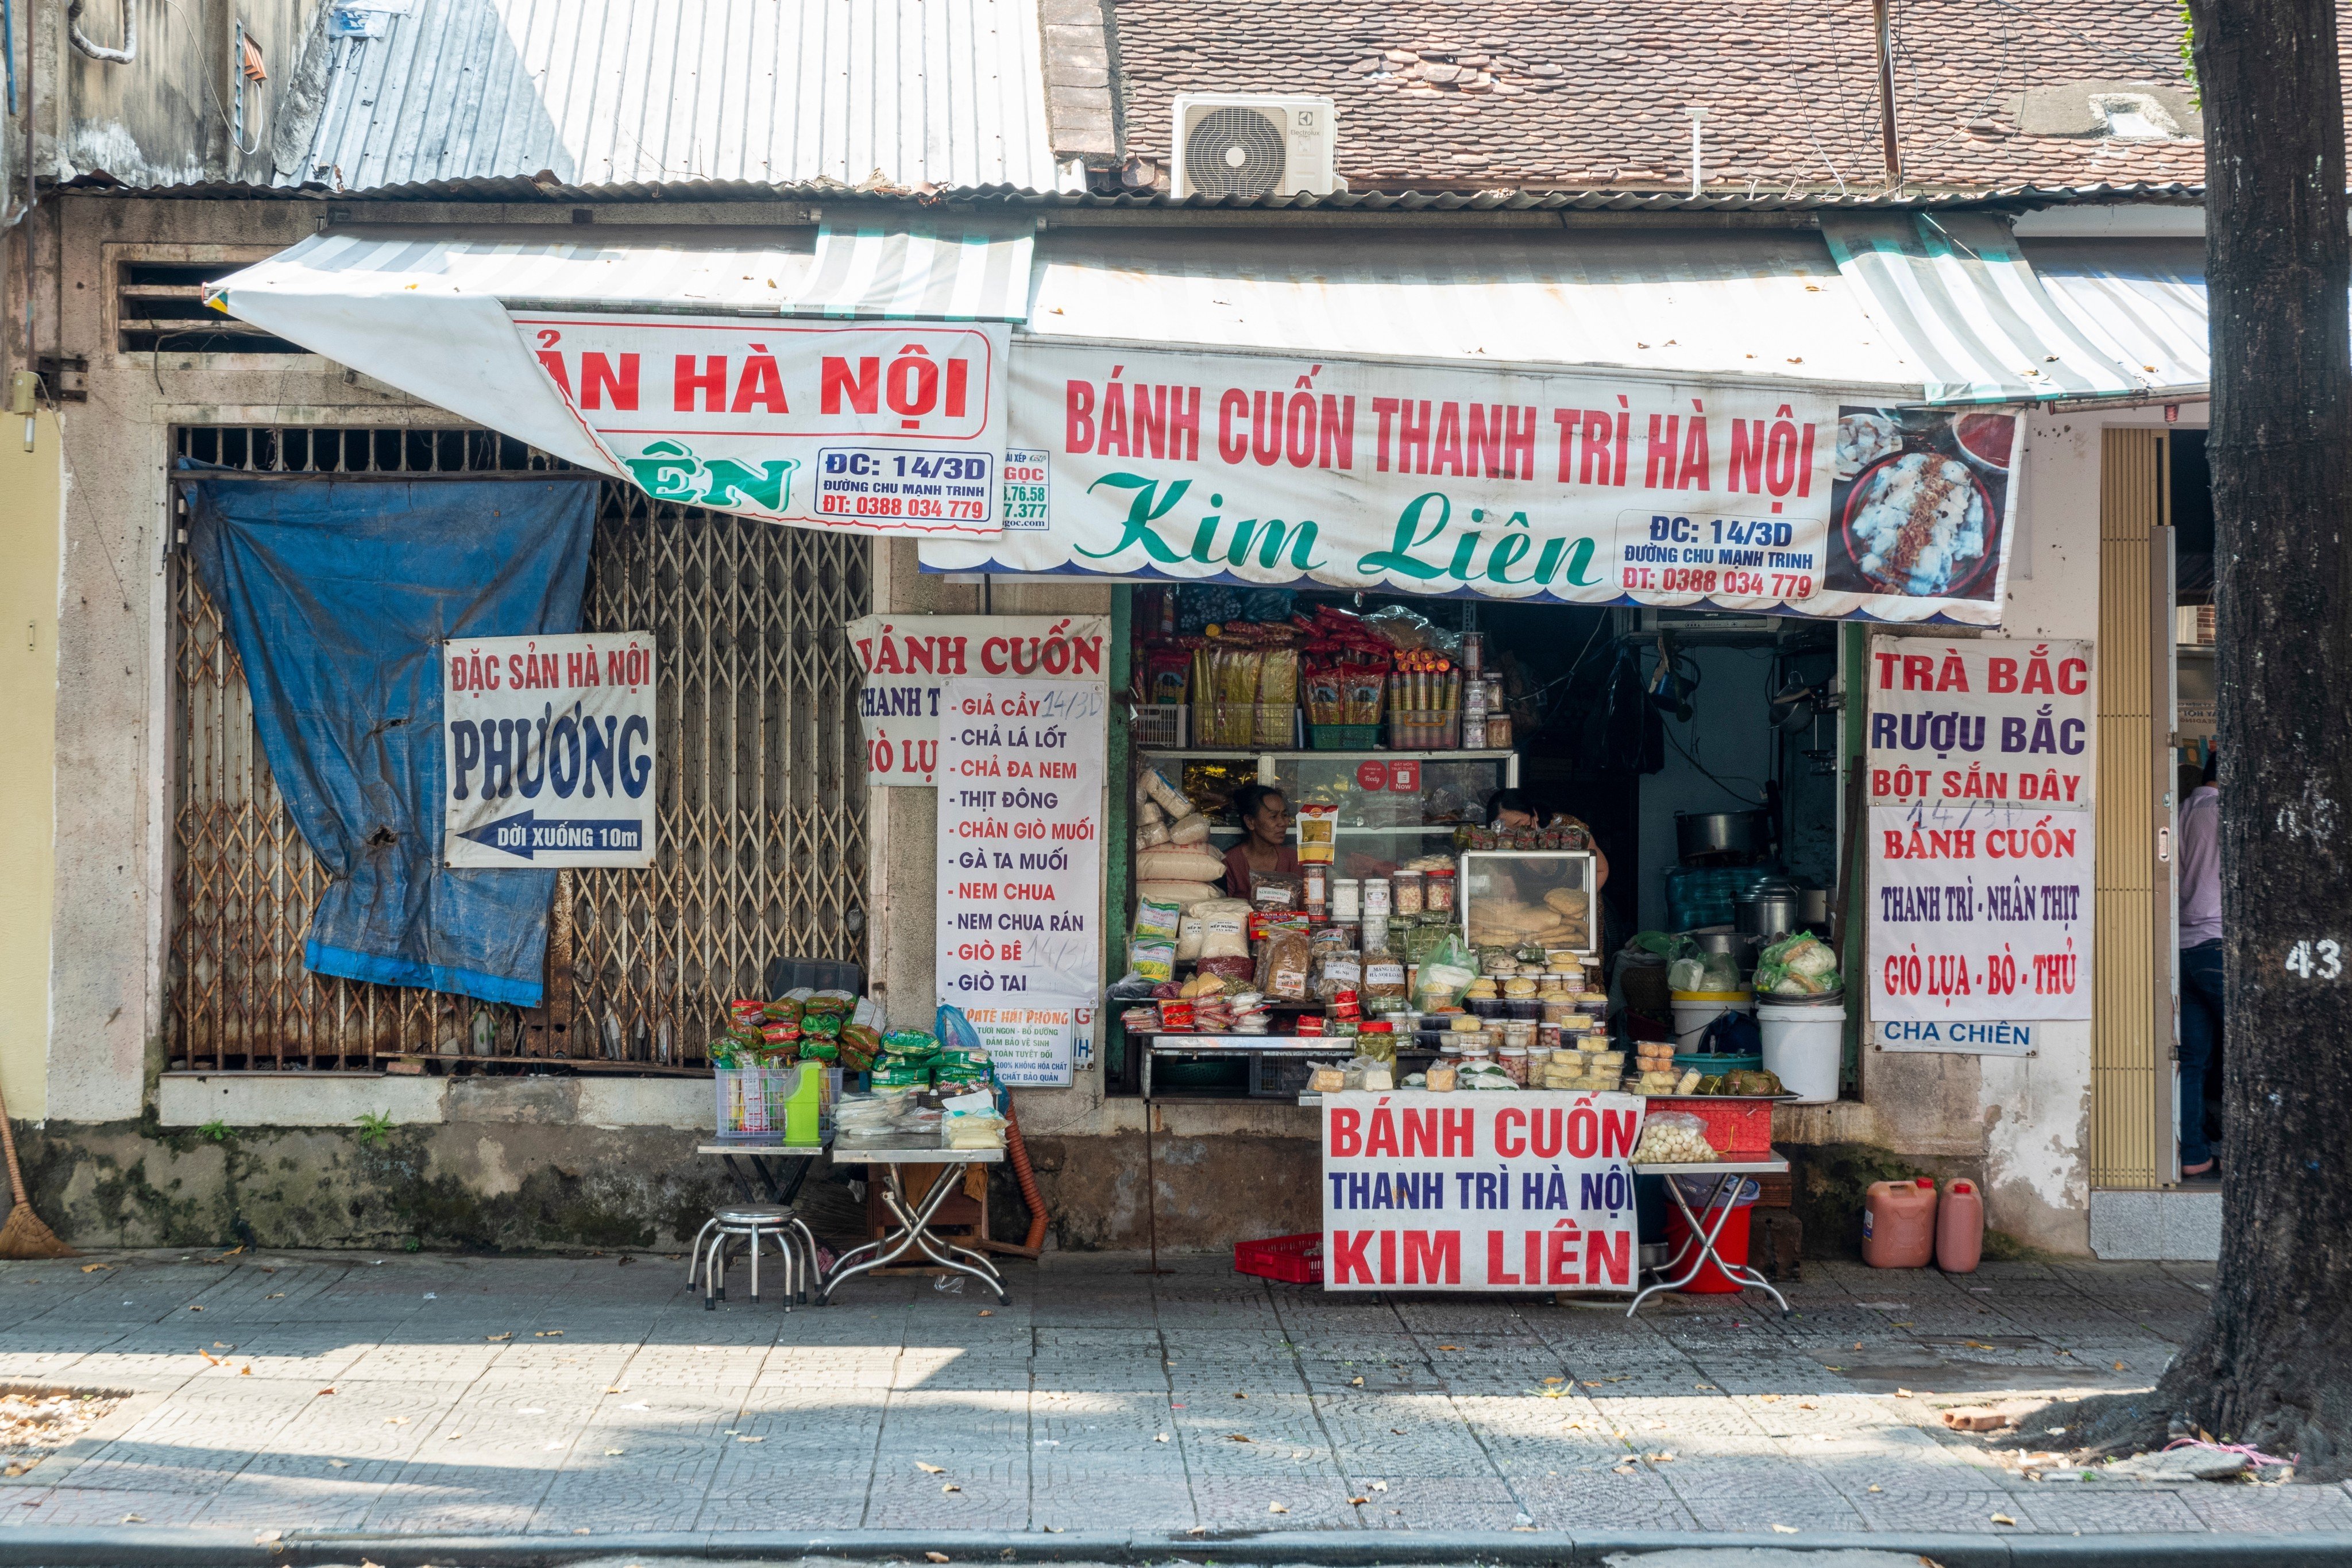 A store on a street in Vietnam. Visiting a country’s supermarkets and convenience stores tells you a lot about its culture and how its citizens live. What’s more, you can compare prices with those back home and even find some tasty souvenirs. Photo: Shutterstock